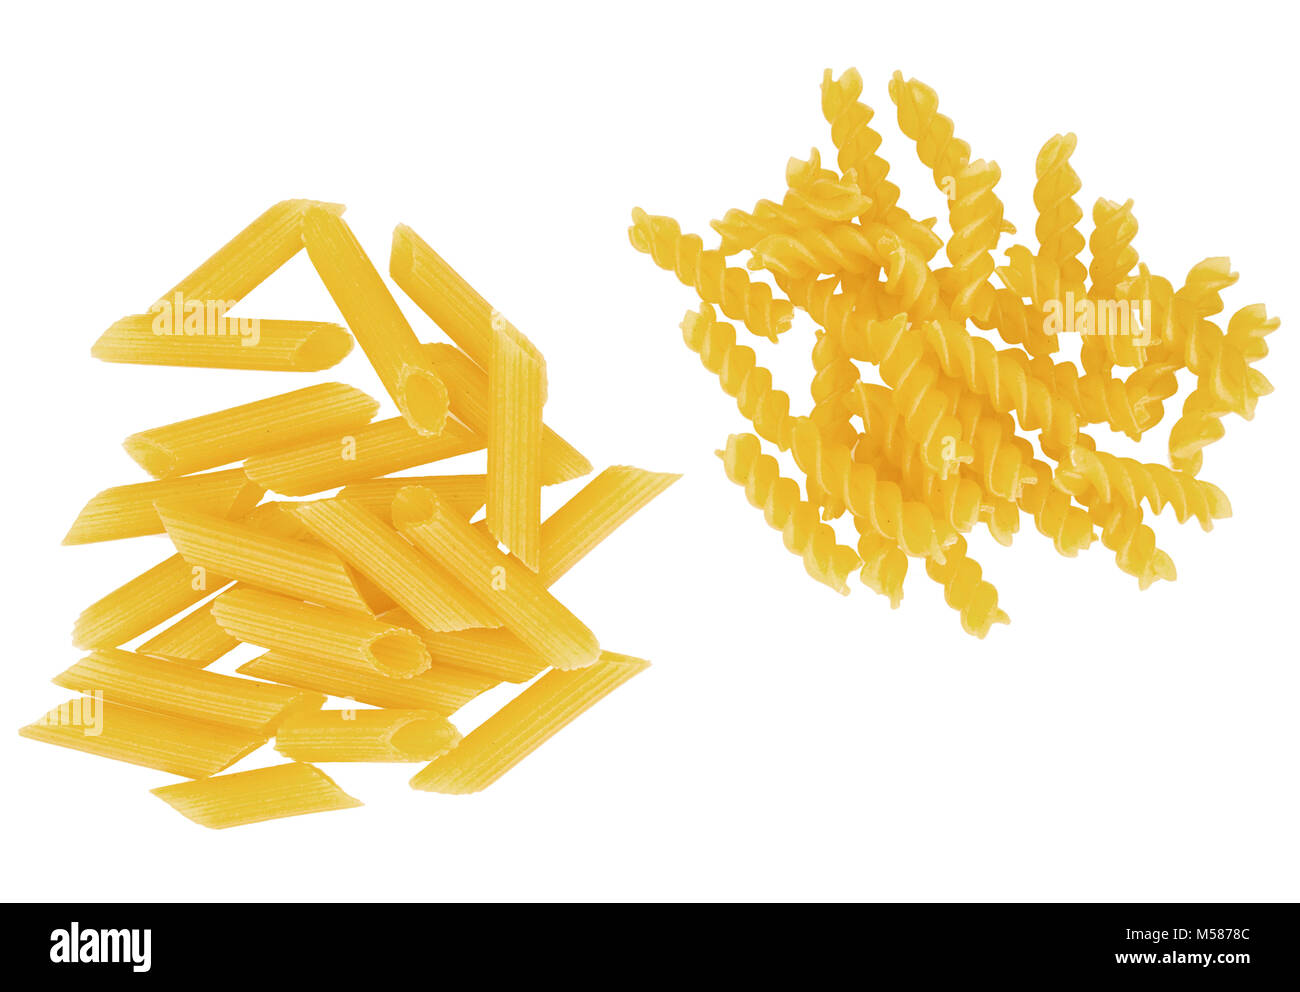 Gluten free pasta isolated. Penne rigate and fusilli. Tubes and spirals. Stock Photo